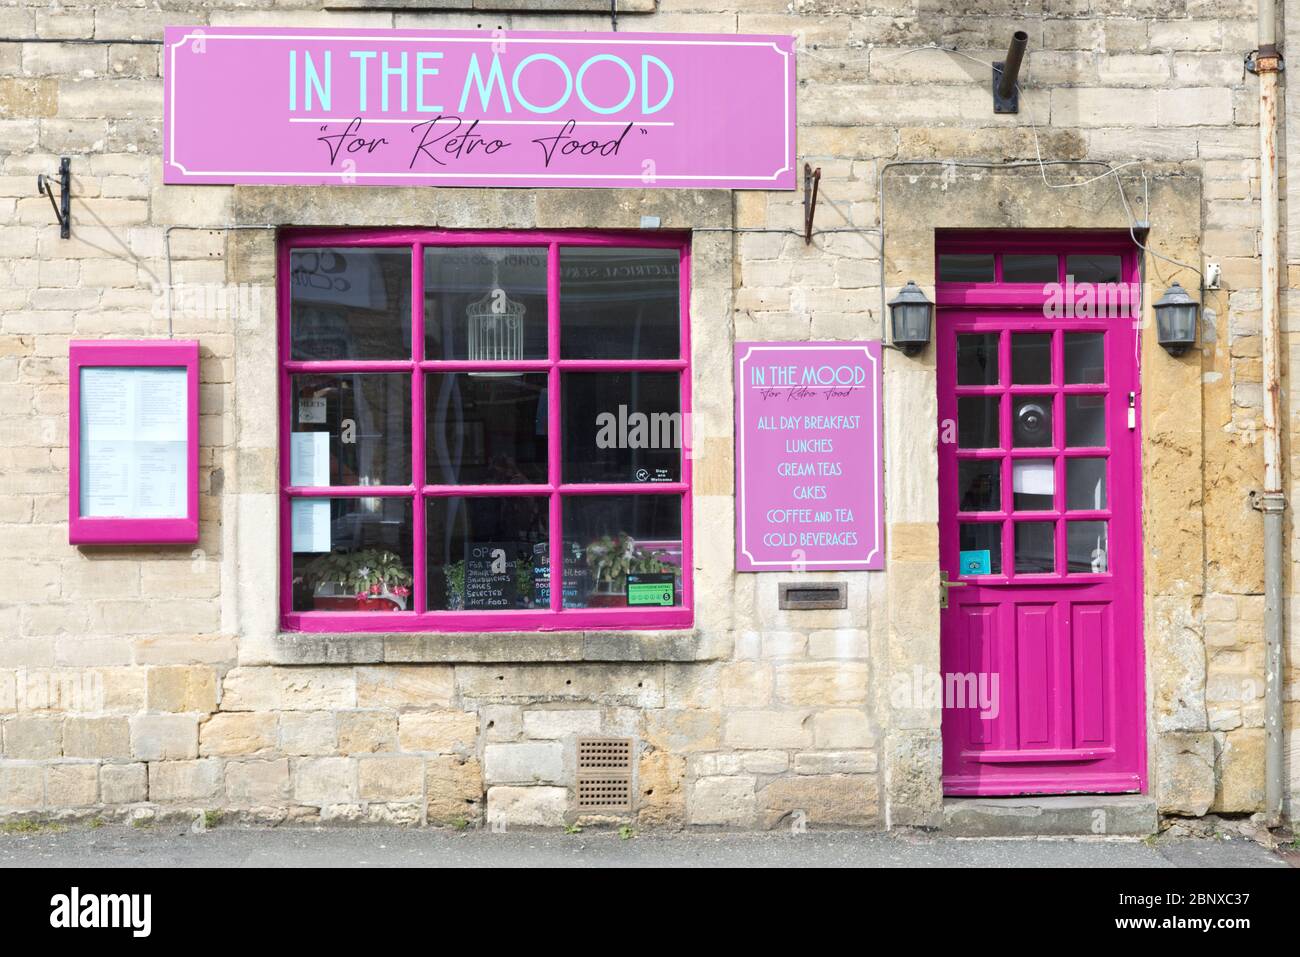 in the mood for retro food, cafe closed due to Covid 19, Stow on the wold Stock Photo